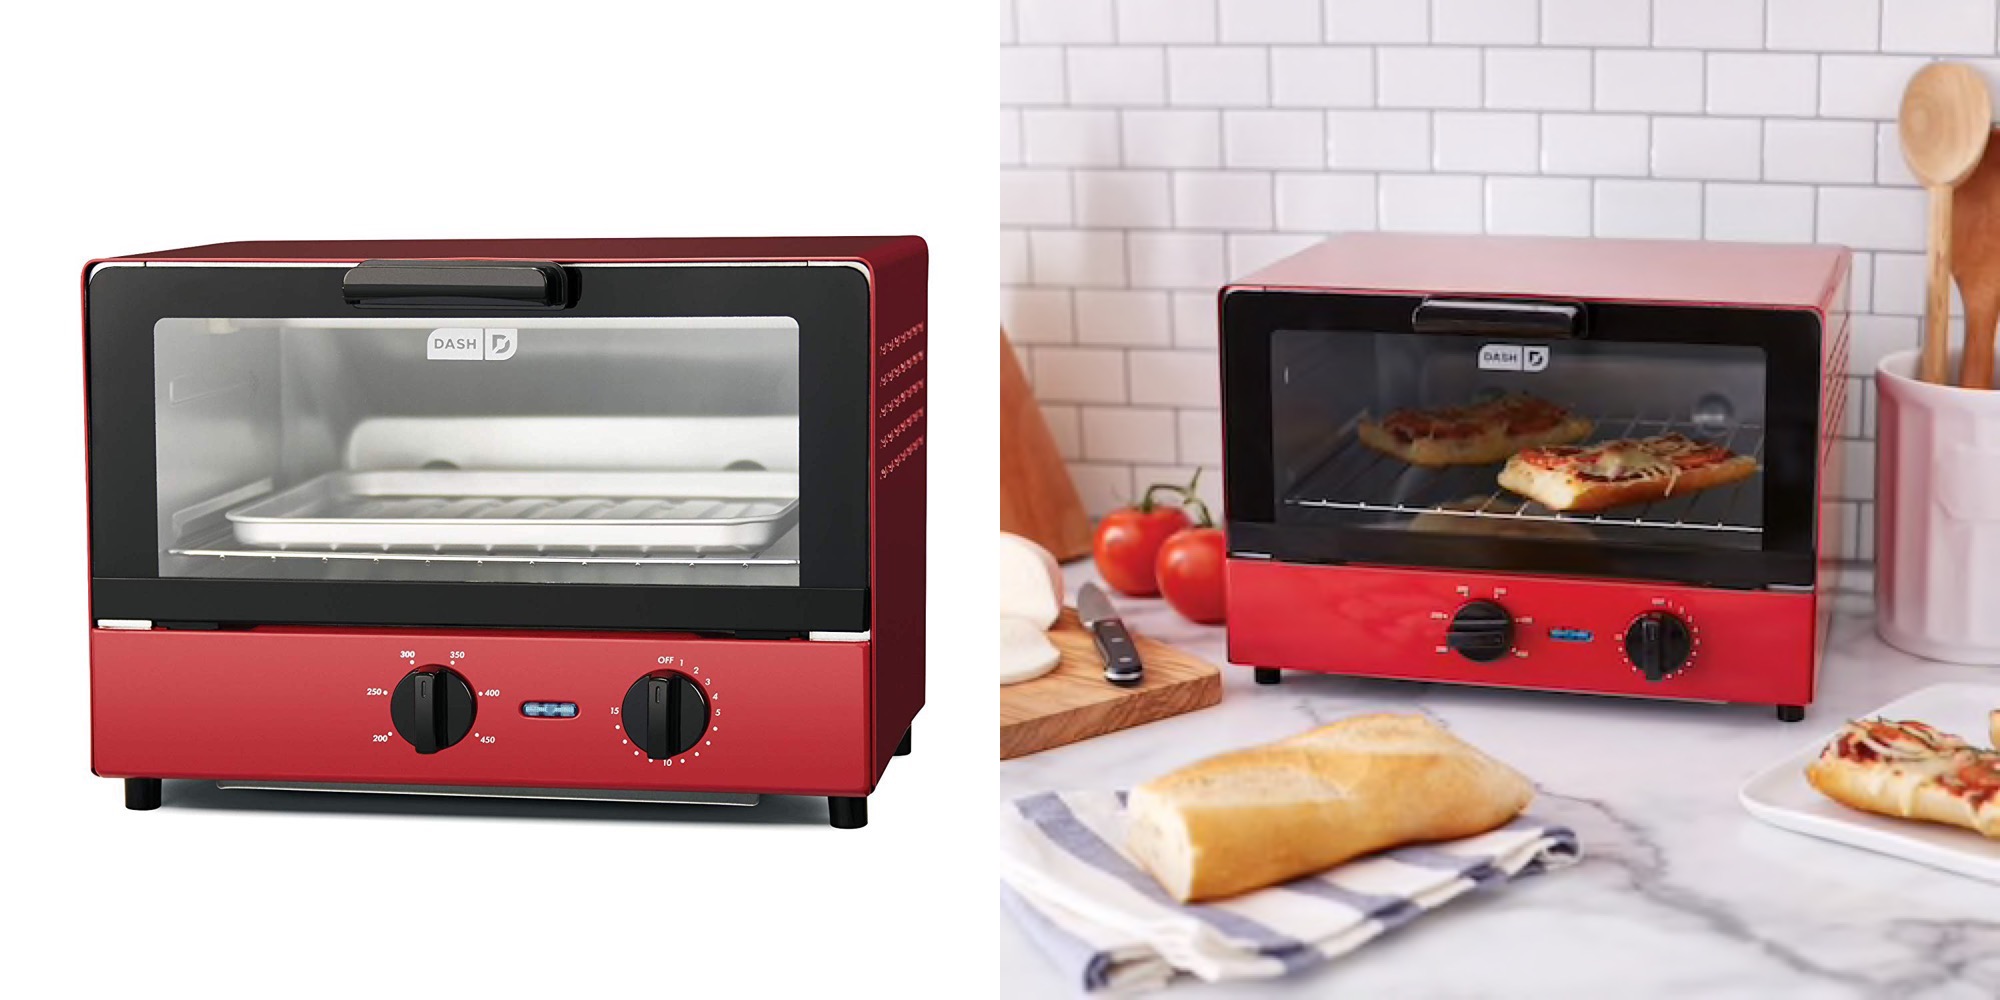 https://9to5toys.com/wp-content/uploads/sites/5/2018/11/Dash-Compact-Toaster-Oven-3.jpg